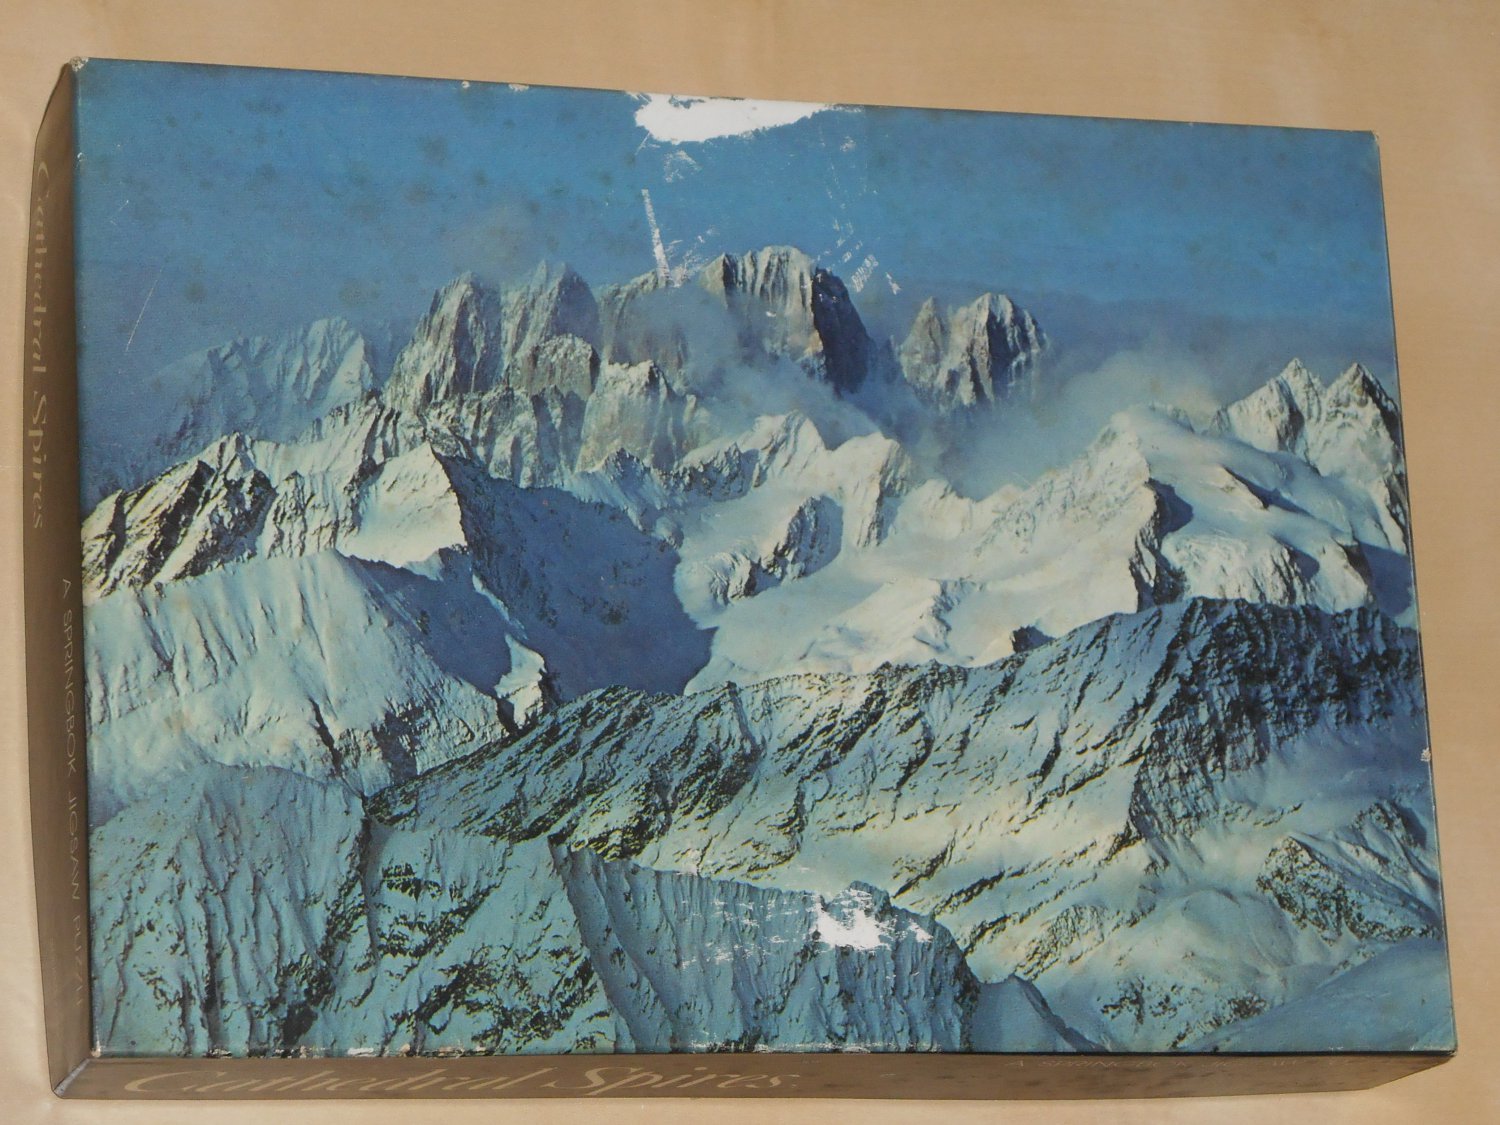 Cathedral Spires 350 Piece Jigsaw Puzzle Springbok PZL7519 Alaska Snowy Mountain COMPLETE 1973